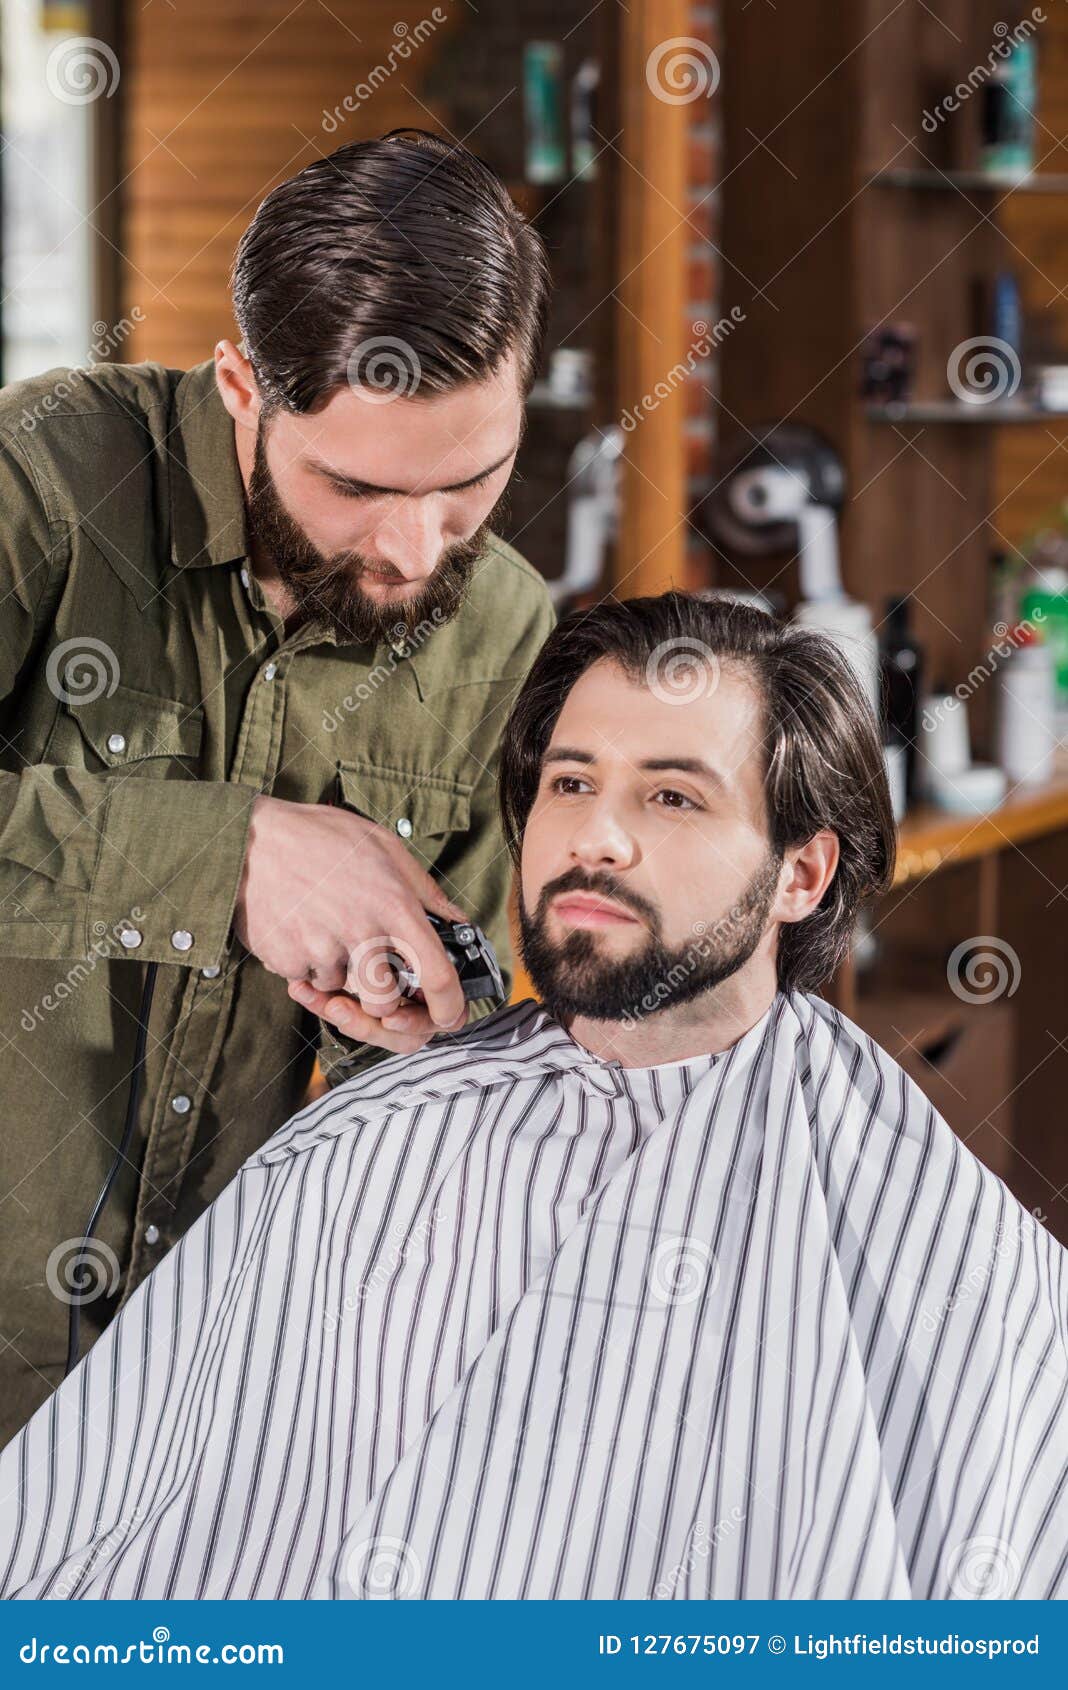 Barber Shaving Client with Hair Clipper Stock Image - Image of shave ...